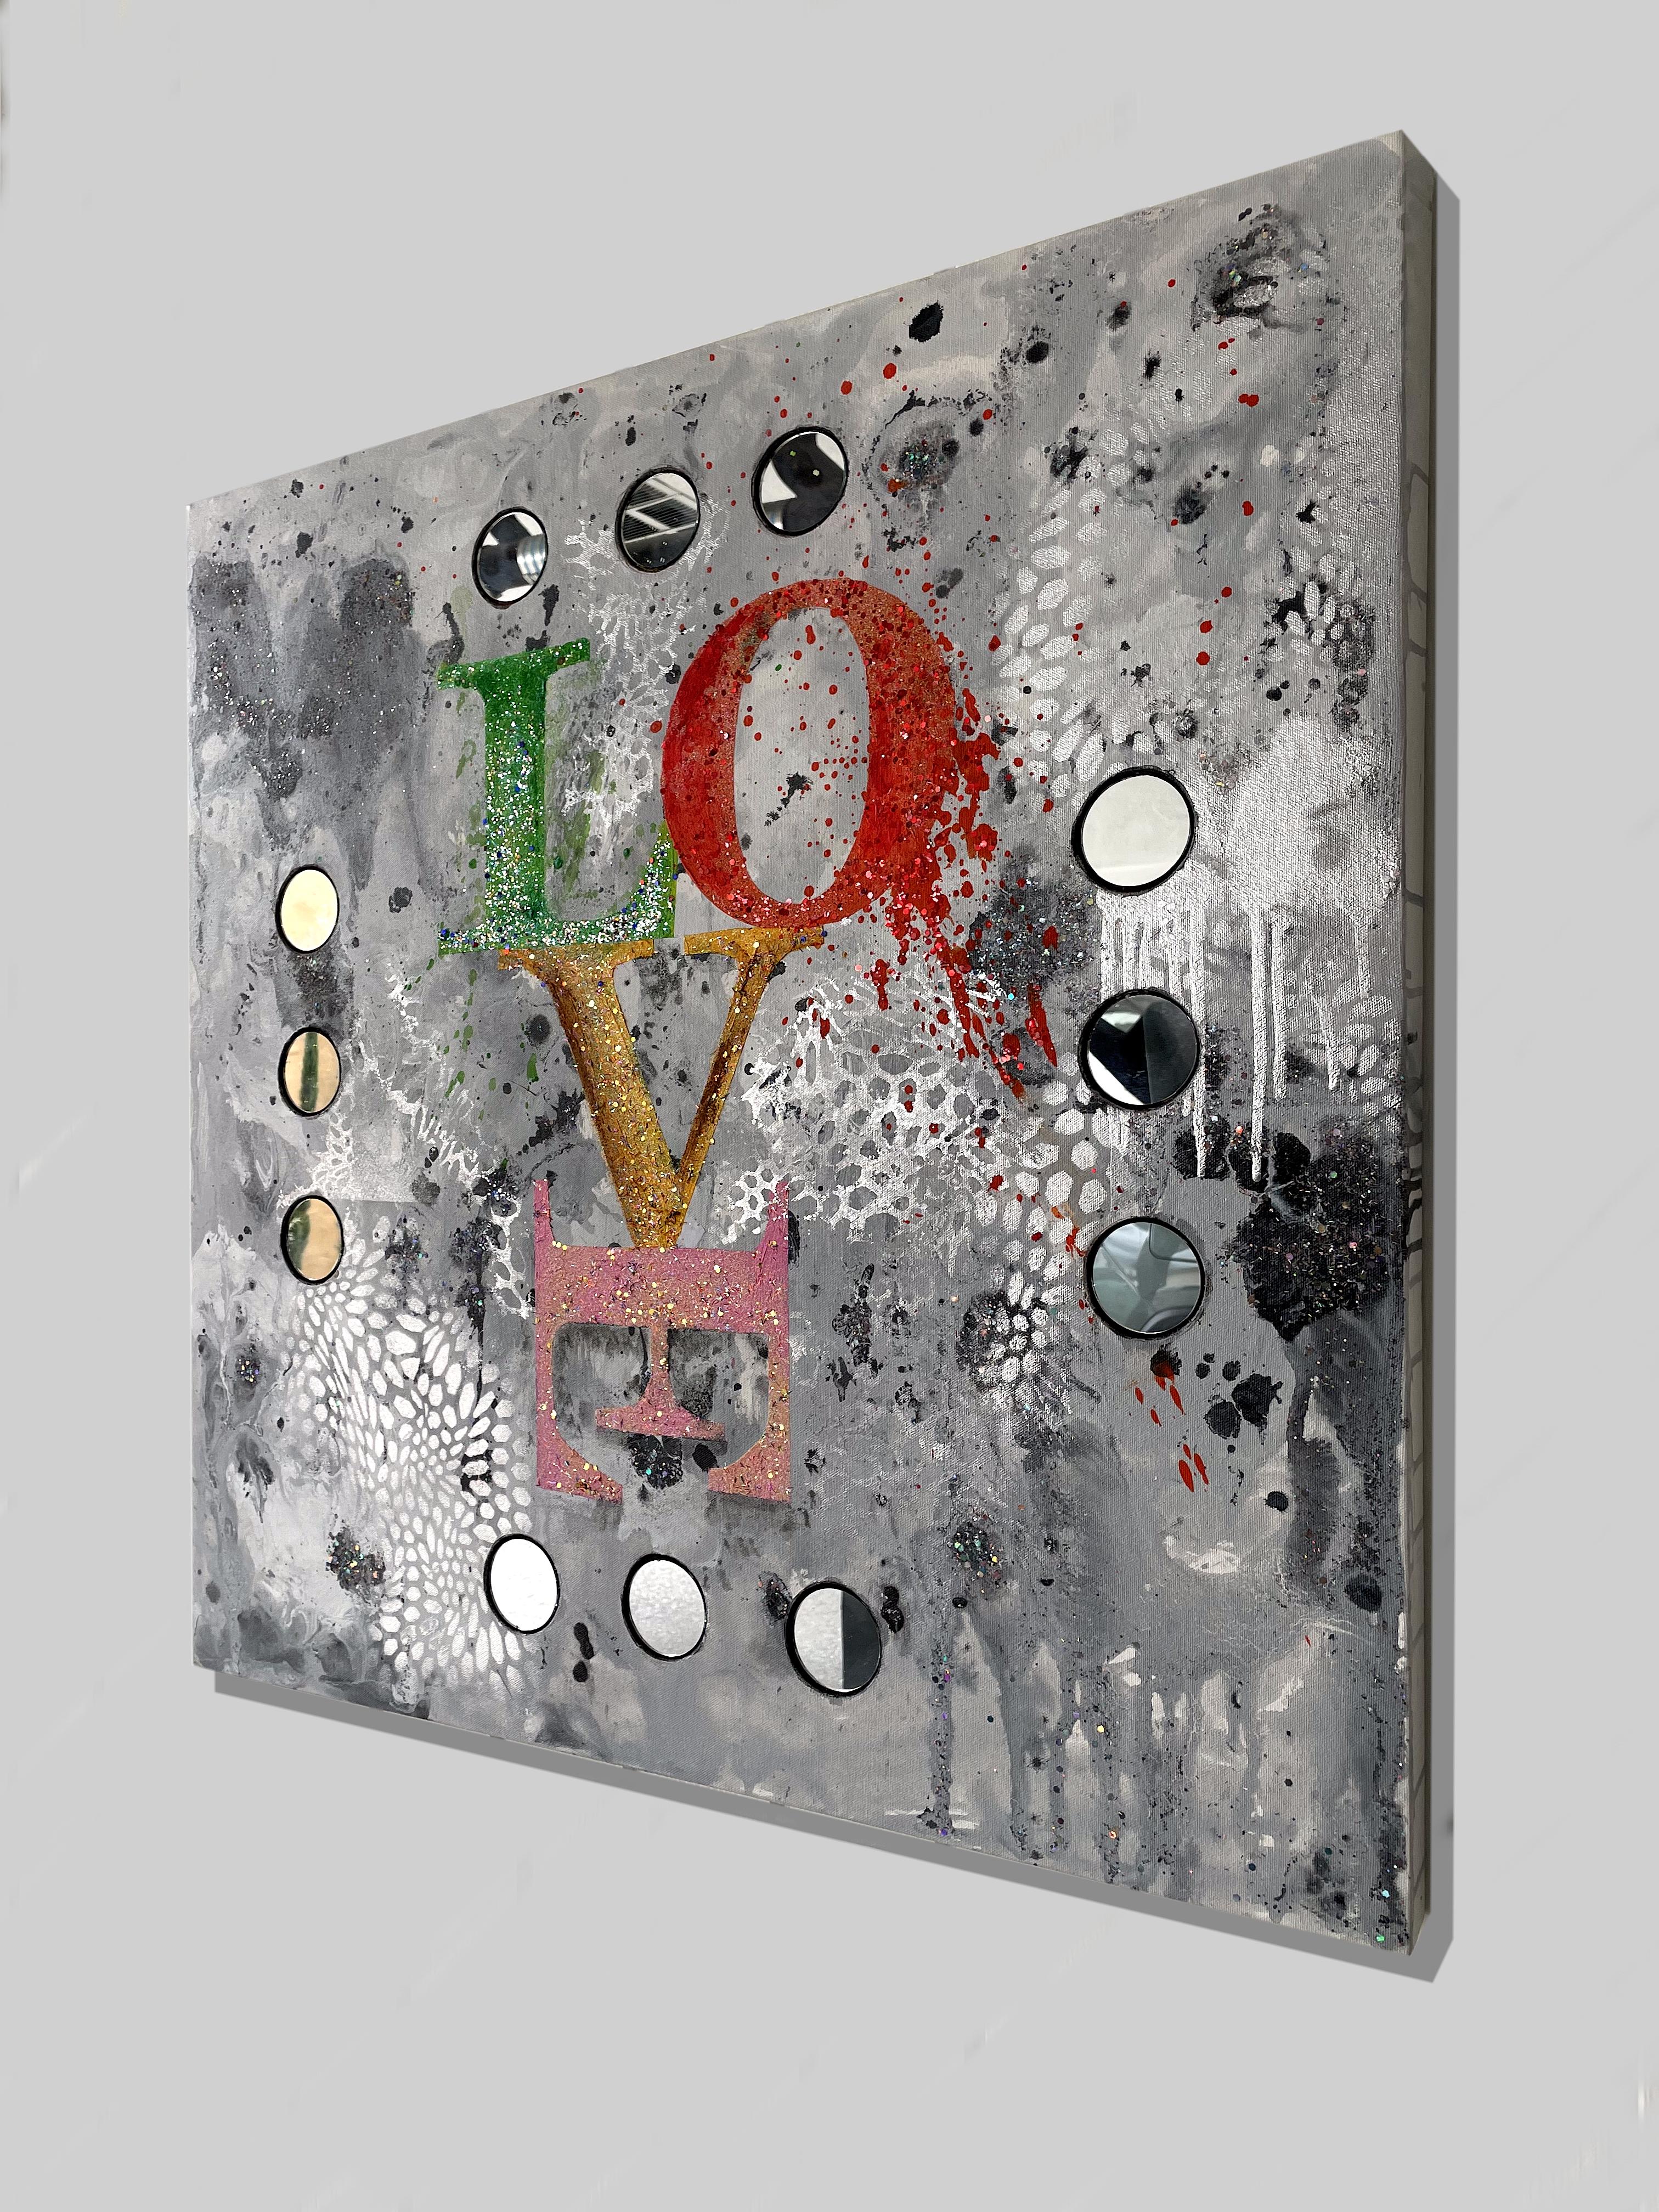 Artist: Kaloust Guedel
Work: Original Painting, Handmade Artwork, One of a Kind 
Medium: Acrylic on Canvas over Board, Mirror, Polyester, Spray Paint.
Year: 2023
Style: Contemporary Art, 
Title: Love-5
Size: 30